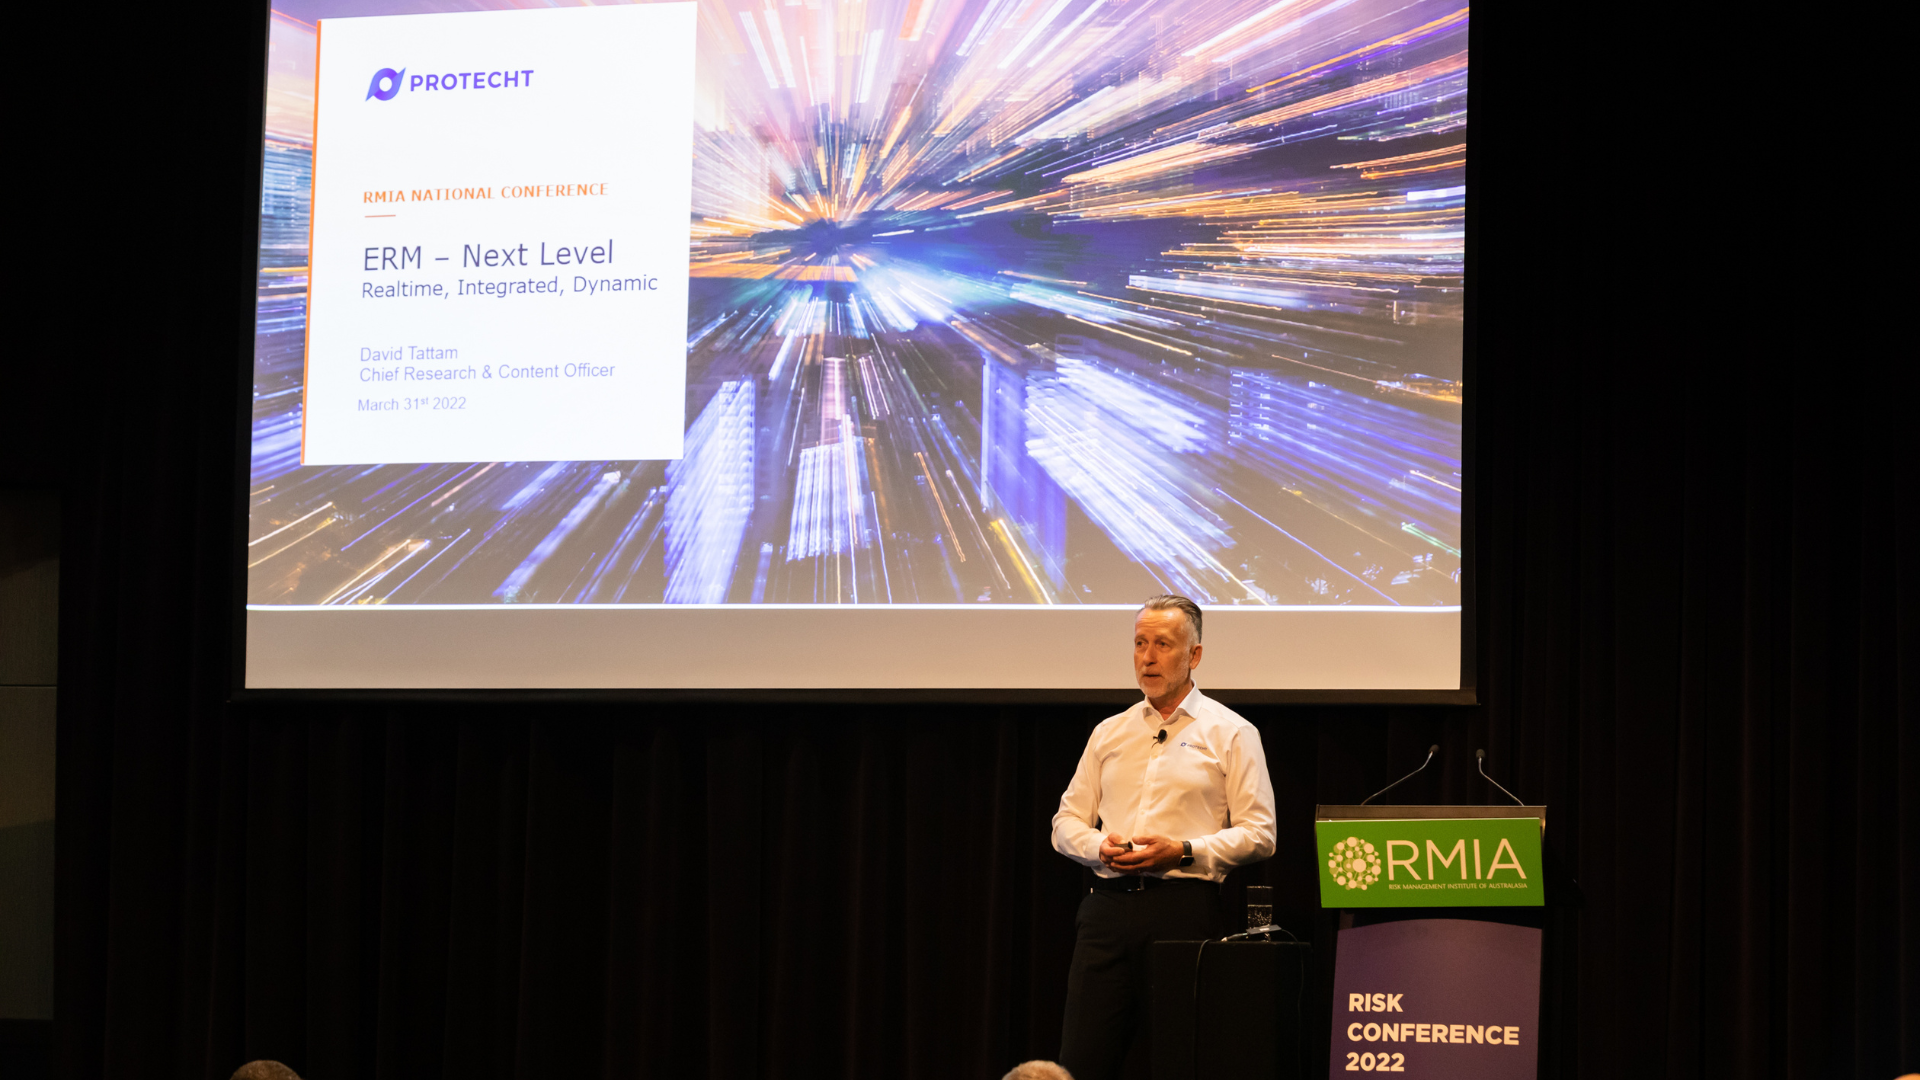 David Tattam speaking at the RMIA conference 2022 about Maturing ERM to the next level